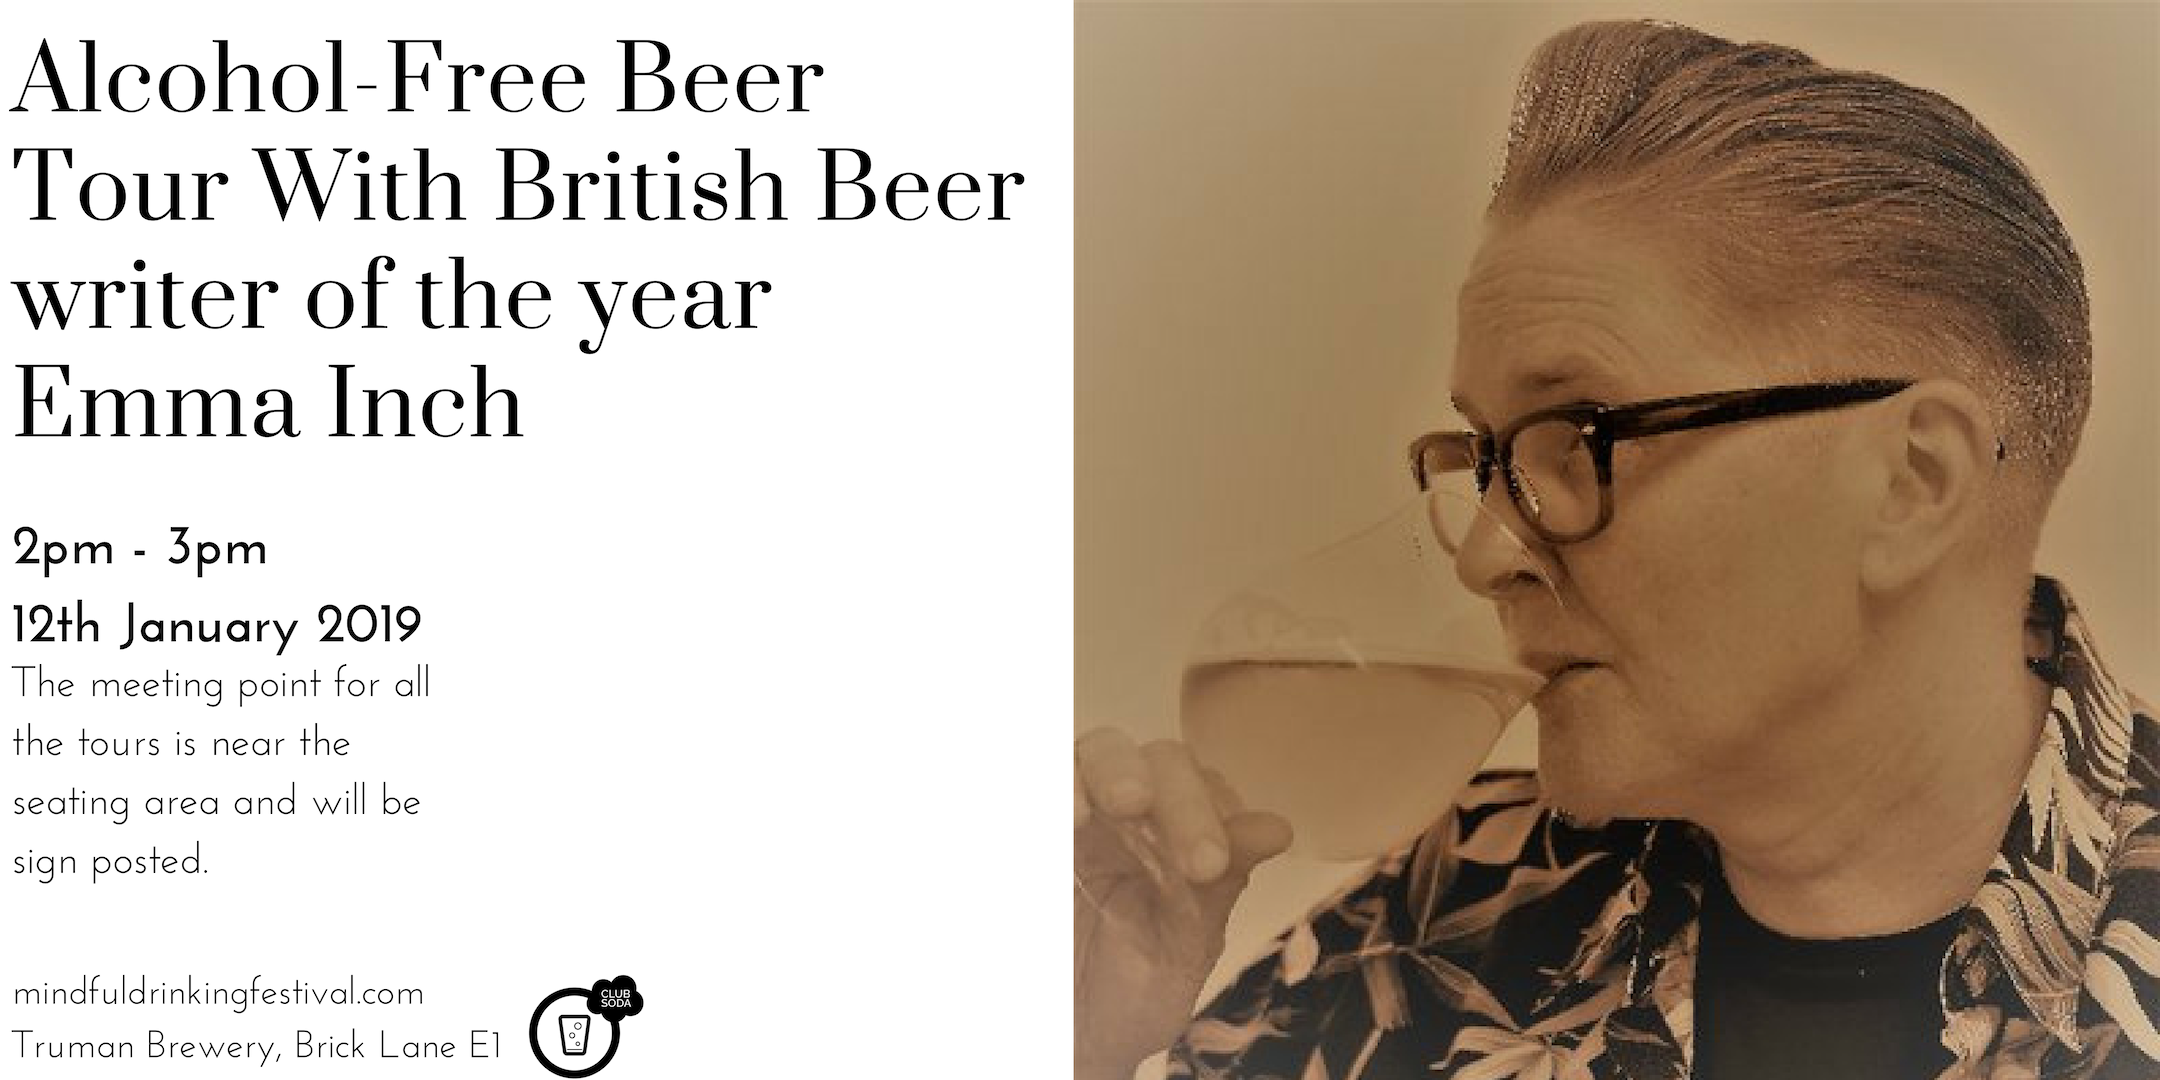 Alcohol-Free Beer Tour With British Beer Writer of the Year Emma Inch 